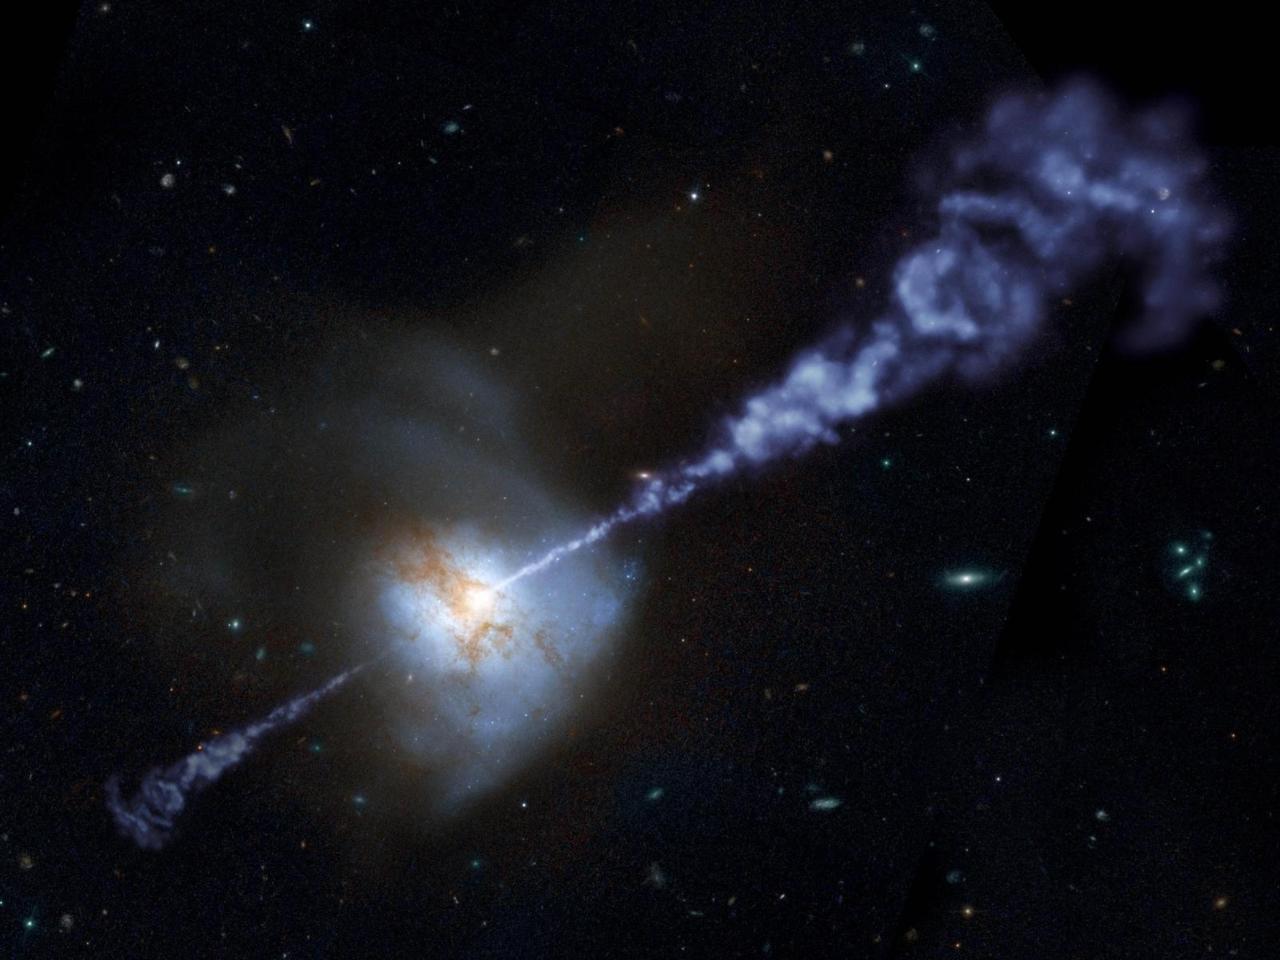 Image description: This artist concept of the local galaxy Arp 220, captured by the Hubble Space Telescope, shows that galaxies with the most powerful, active, supermassive black holes at their cores produce fewer stars than galaxies with less ones. Learn more about how active black holes squash star formation.
Image courtesy of NASA/JPL-Caltech